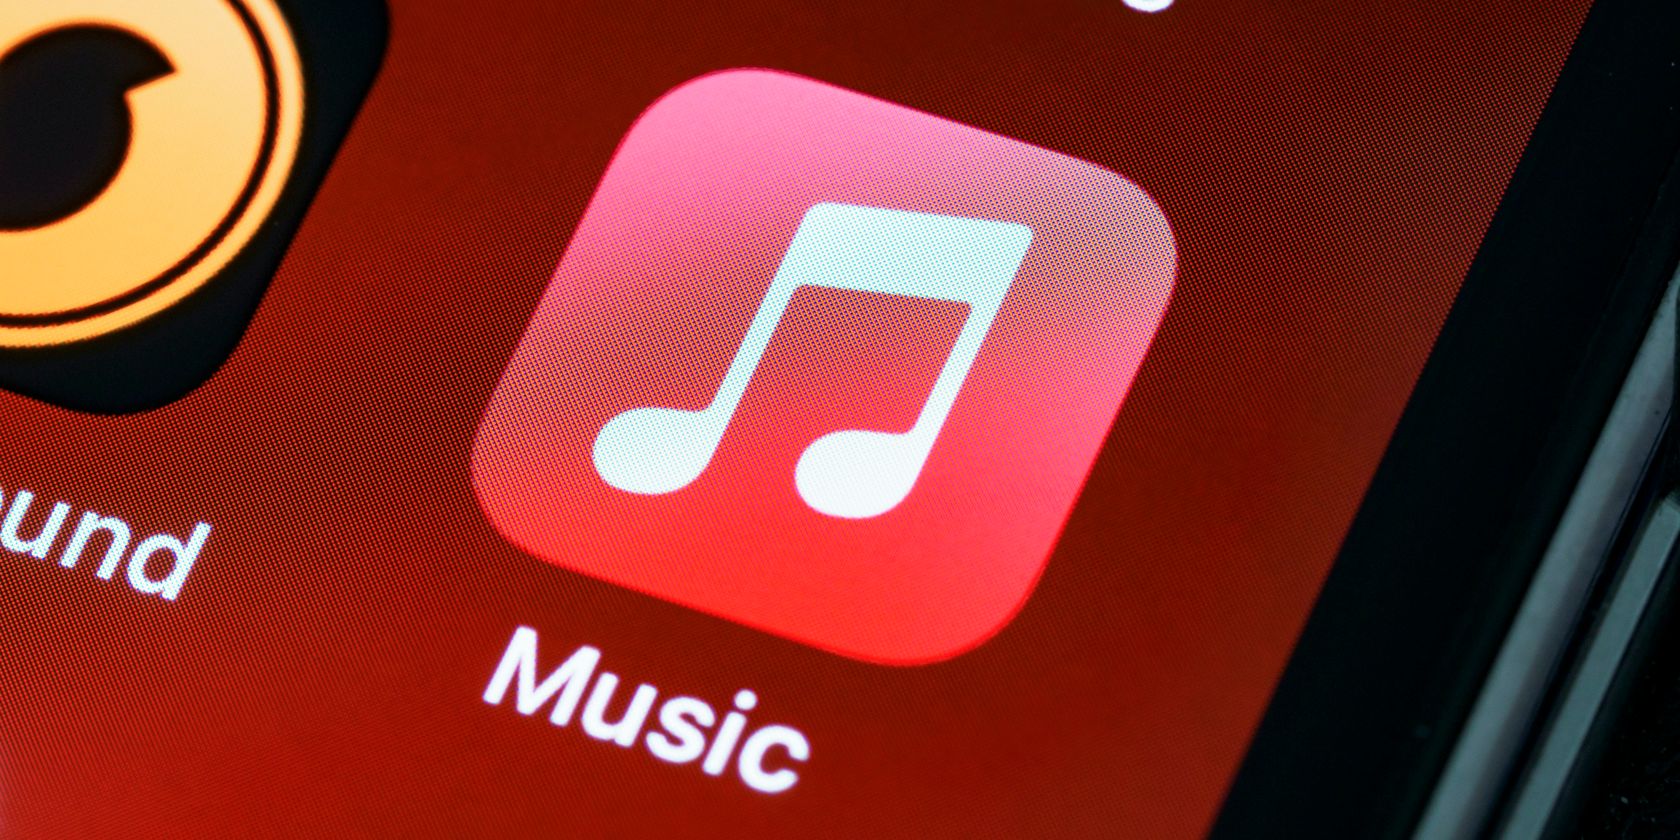 Apple Music icon on an iPhone screen